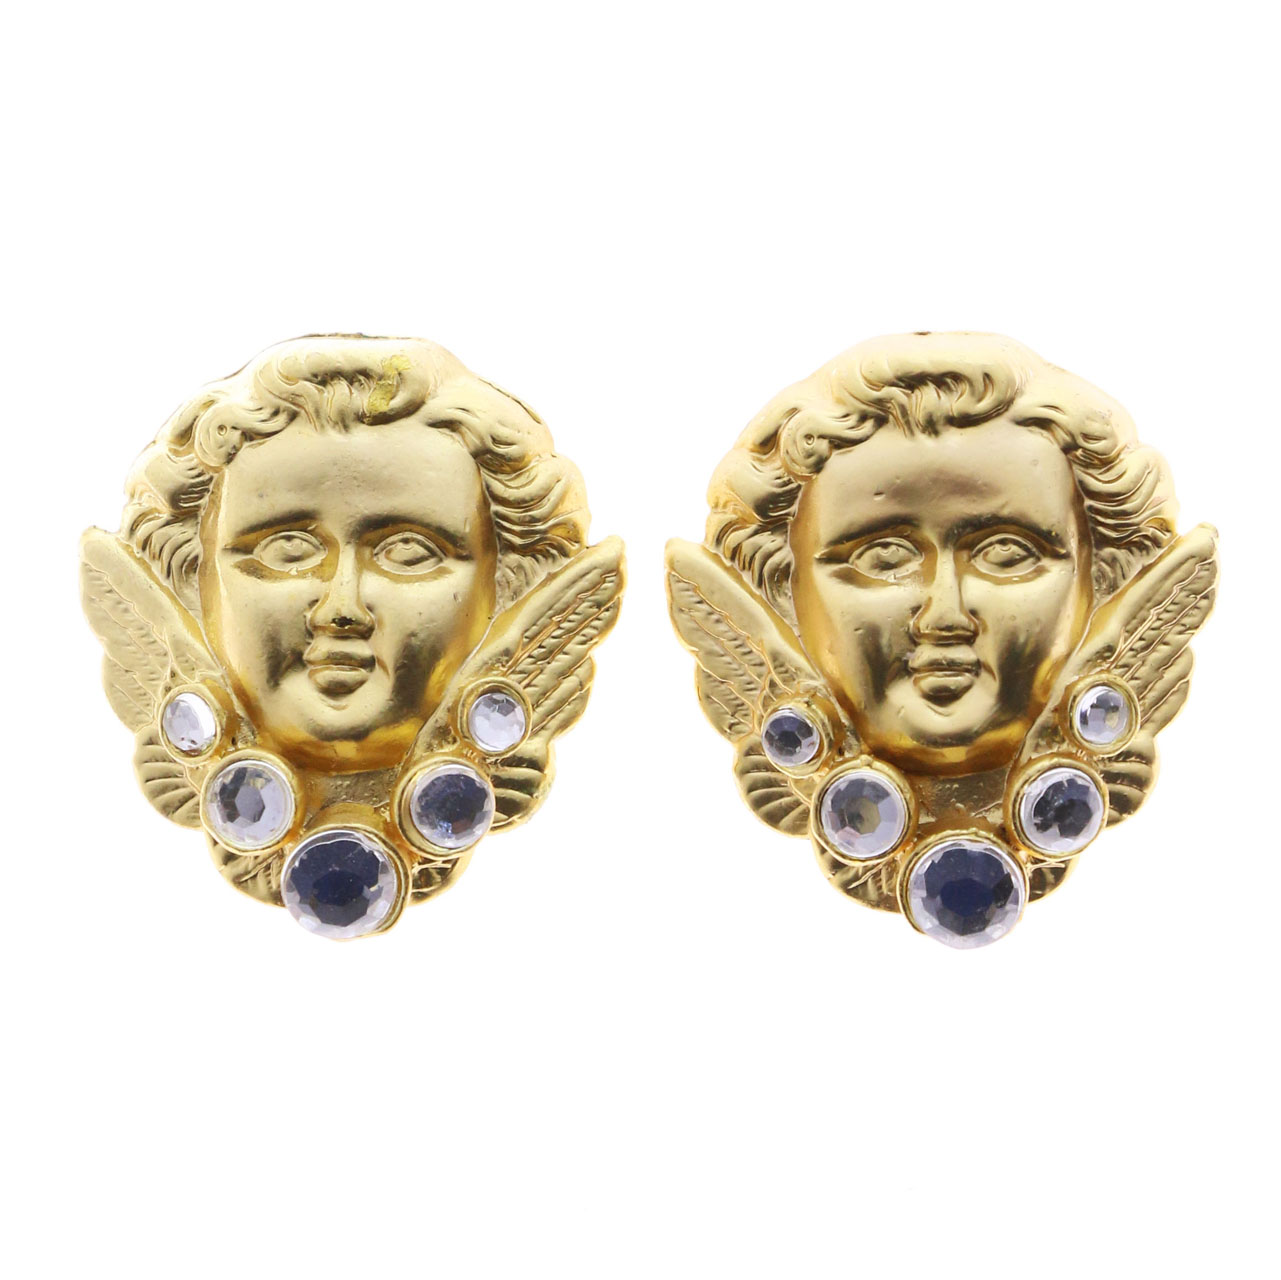 Mi Amore Crystal Accents Cherub Clip-On-Earrings Gold-Tone - image 1 of 2